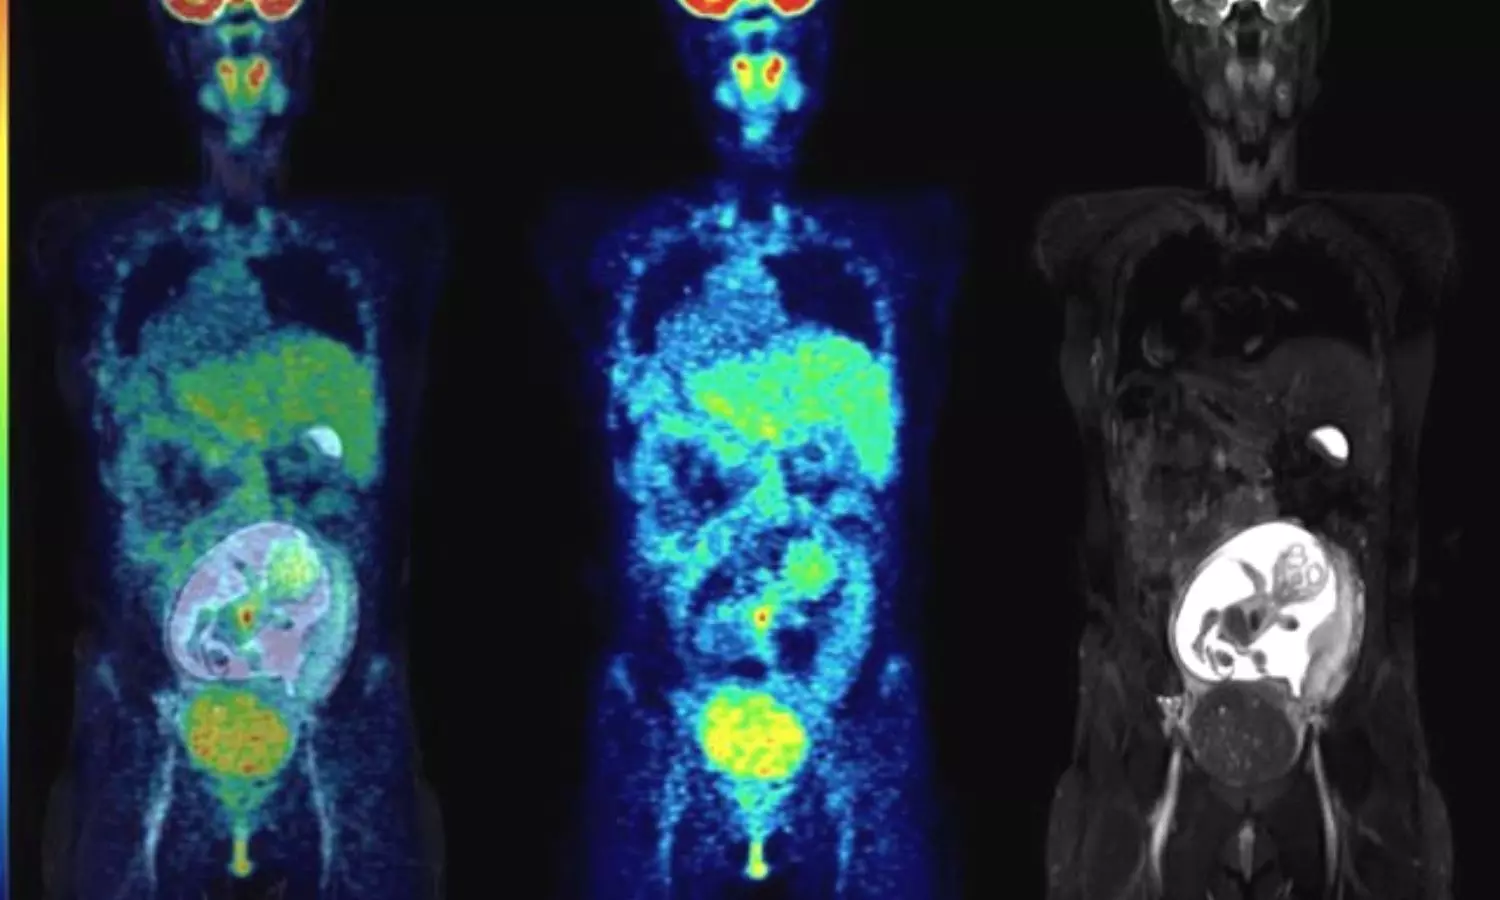 Hybrid PET/MRI scans safe in pregnant women with cancer, study finds